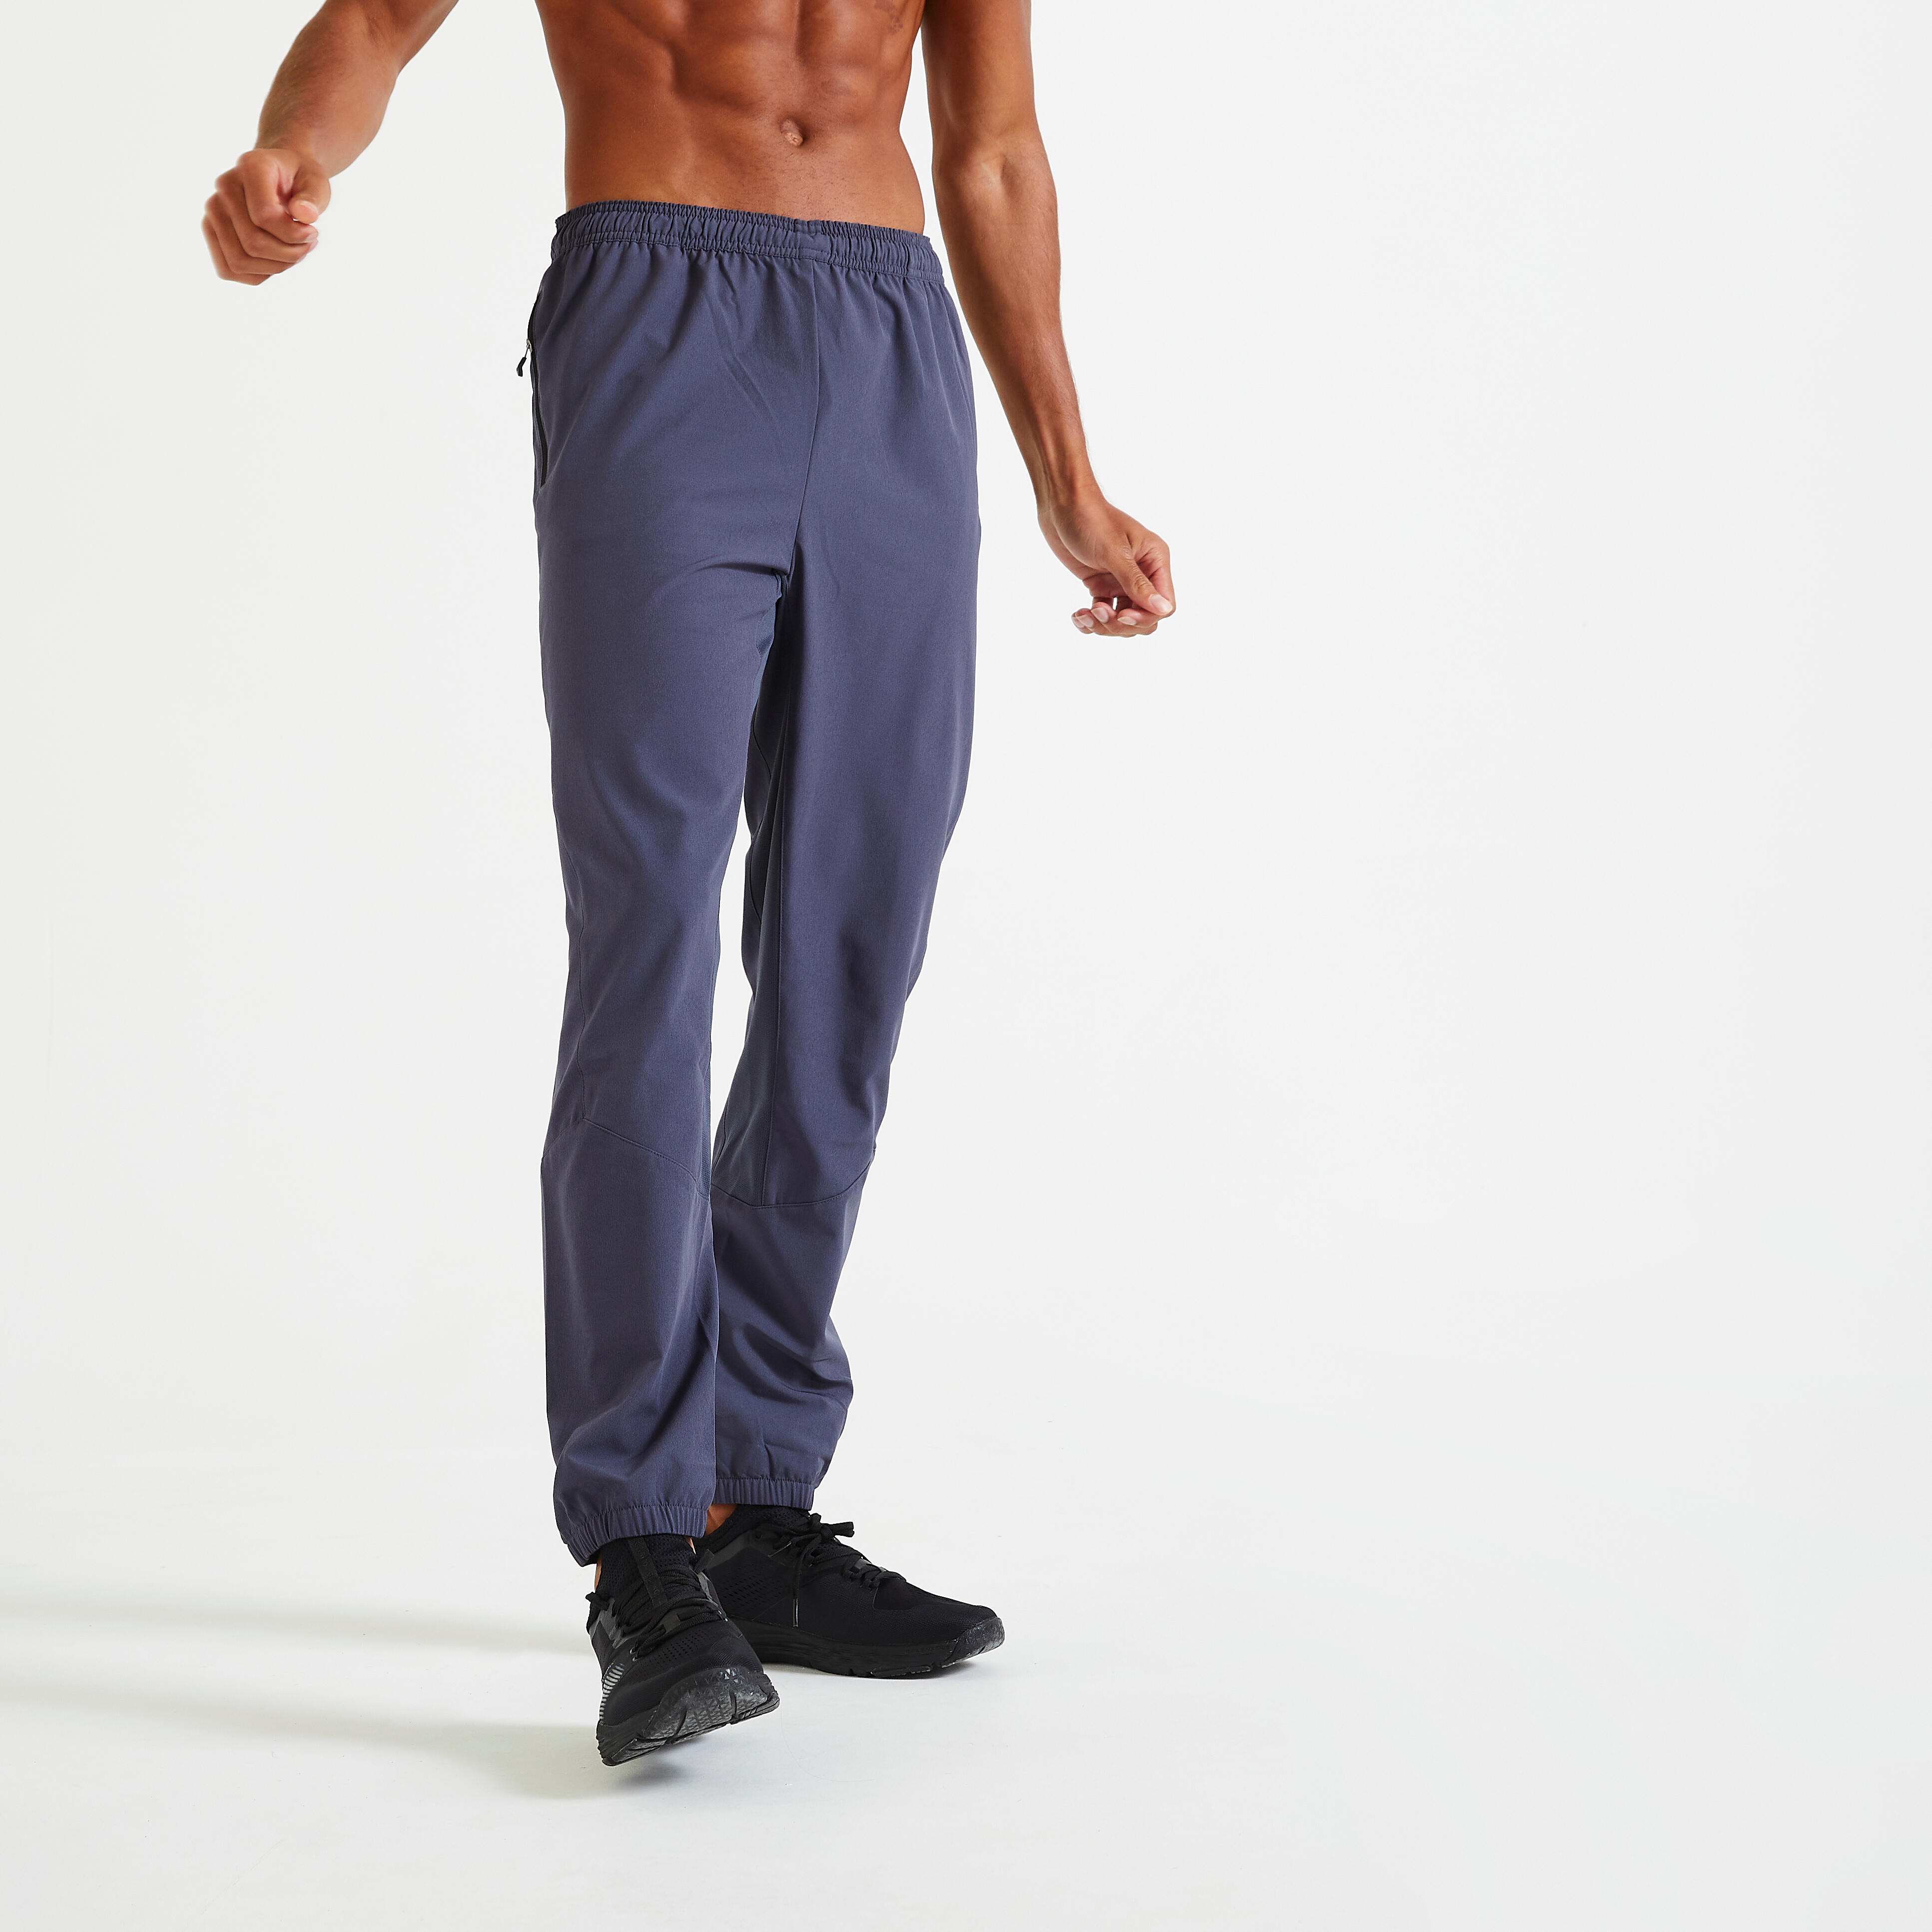 Short Men's Jersey Athletic Pants, Relaxed Fit - 3 Colors to Choose Fr –  ForTheFit.com